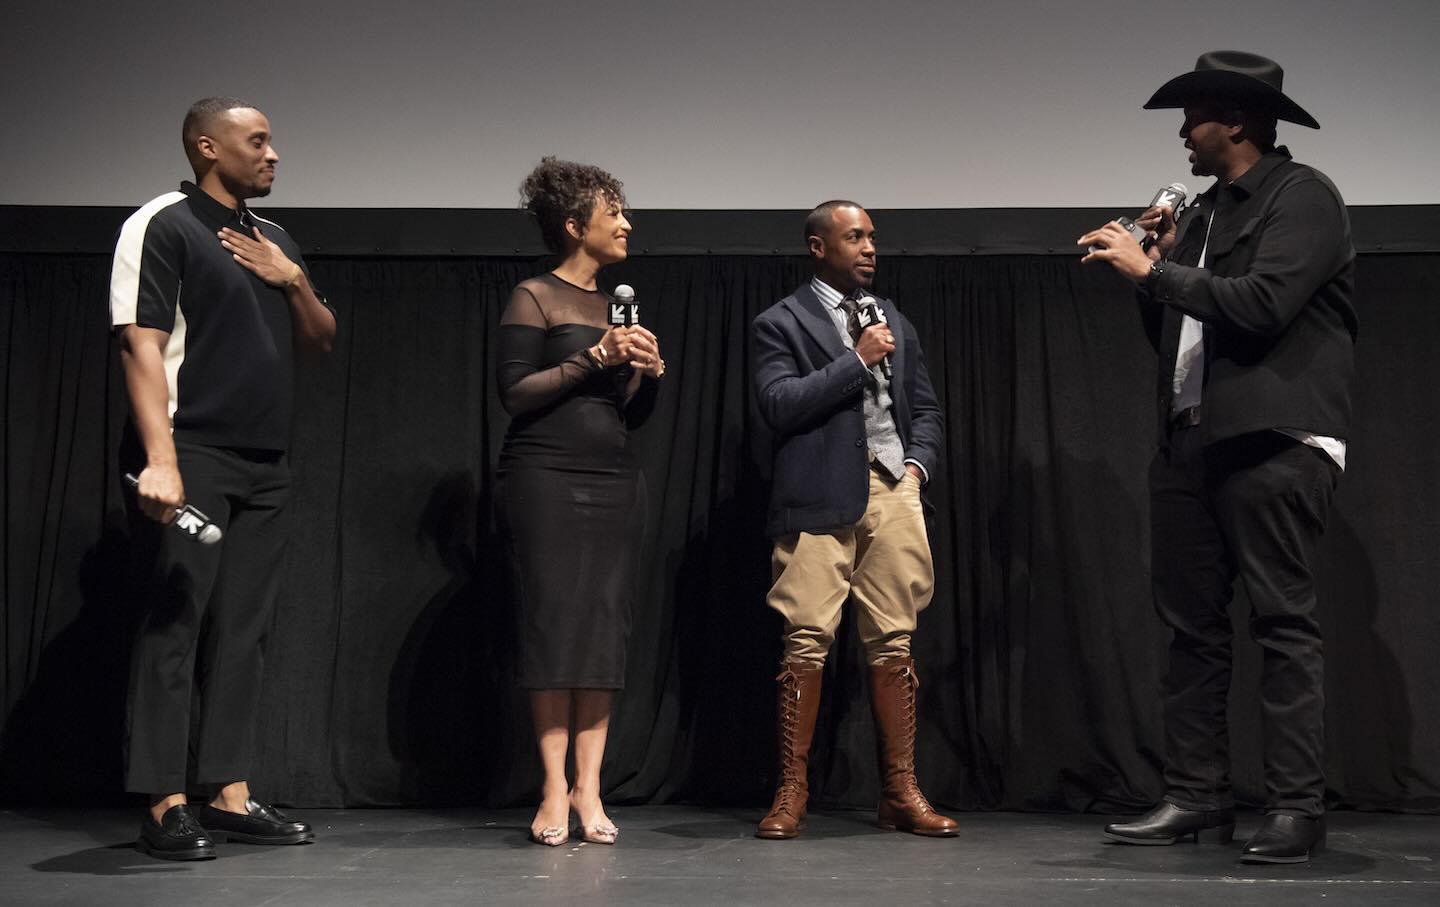 Prentice Penny was joined on stage by showrunner Joie Jacoby and producer Jason Parham for a Q&A, moderated by Van Lathan.